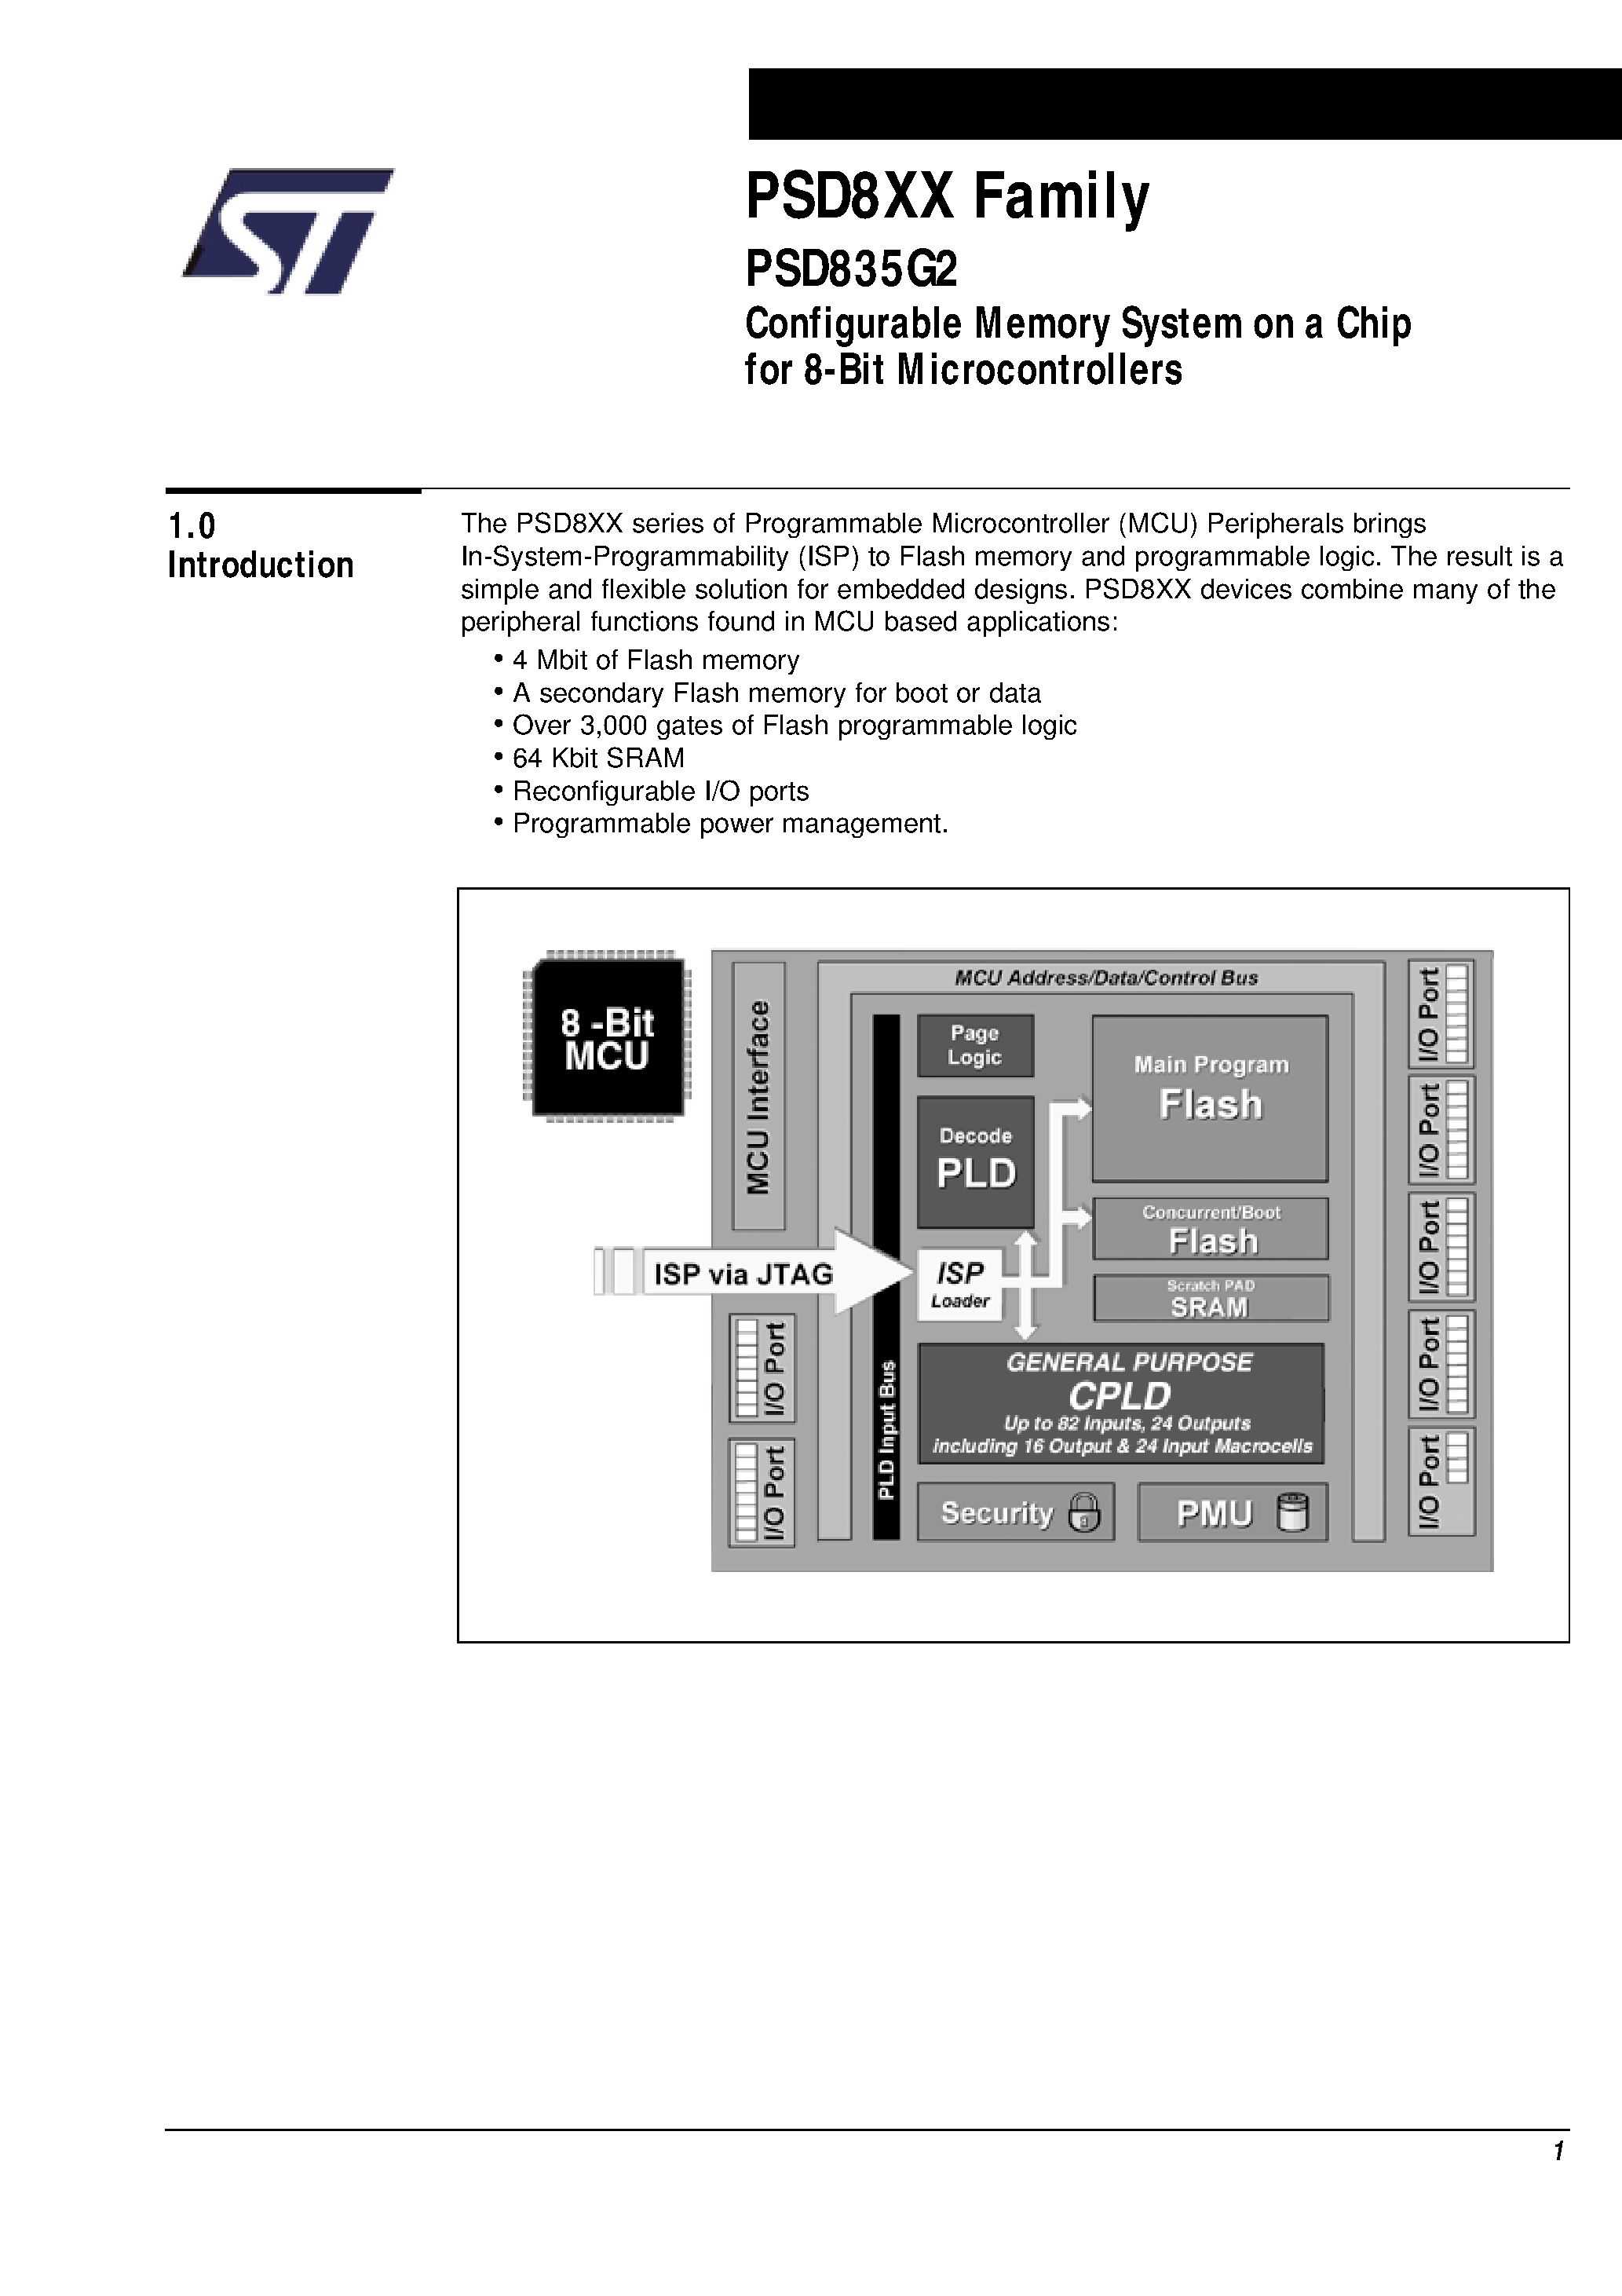 Datasheet PSD835F2V-A-90UI - Configurable Memory System on a Chip for 8-Bit Microcontrollers page 2